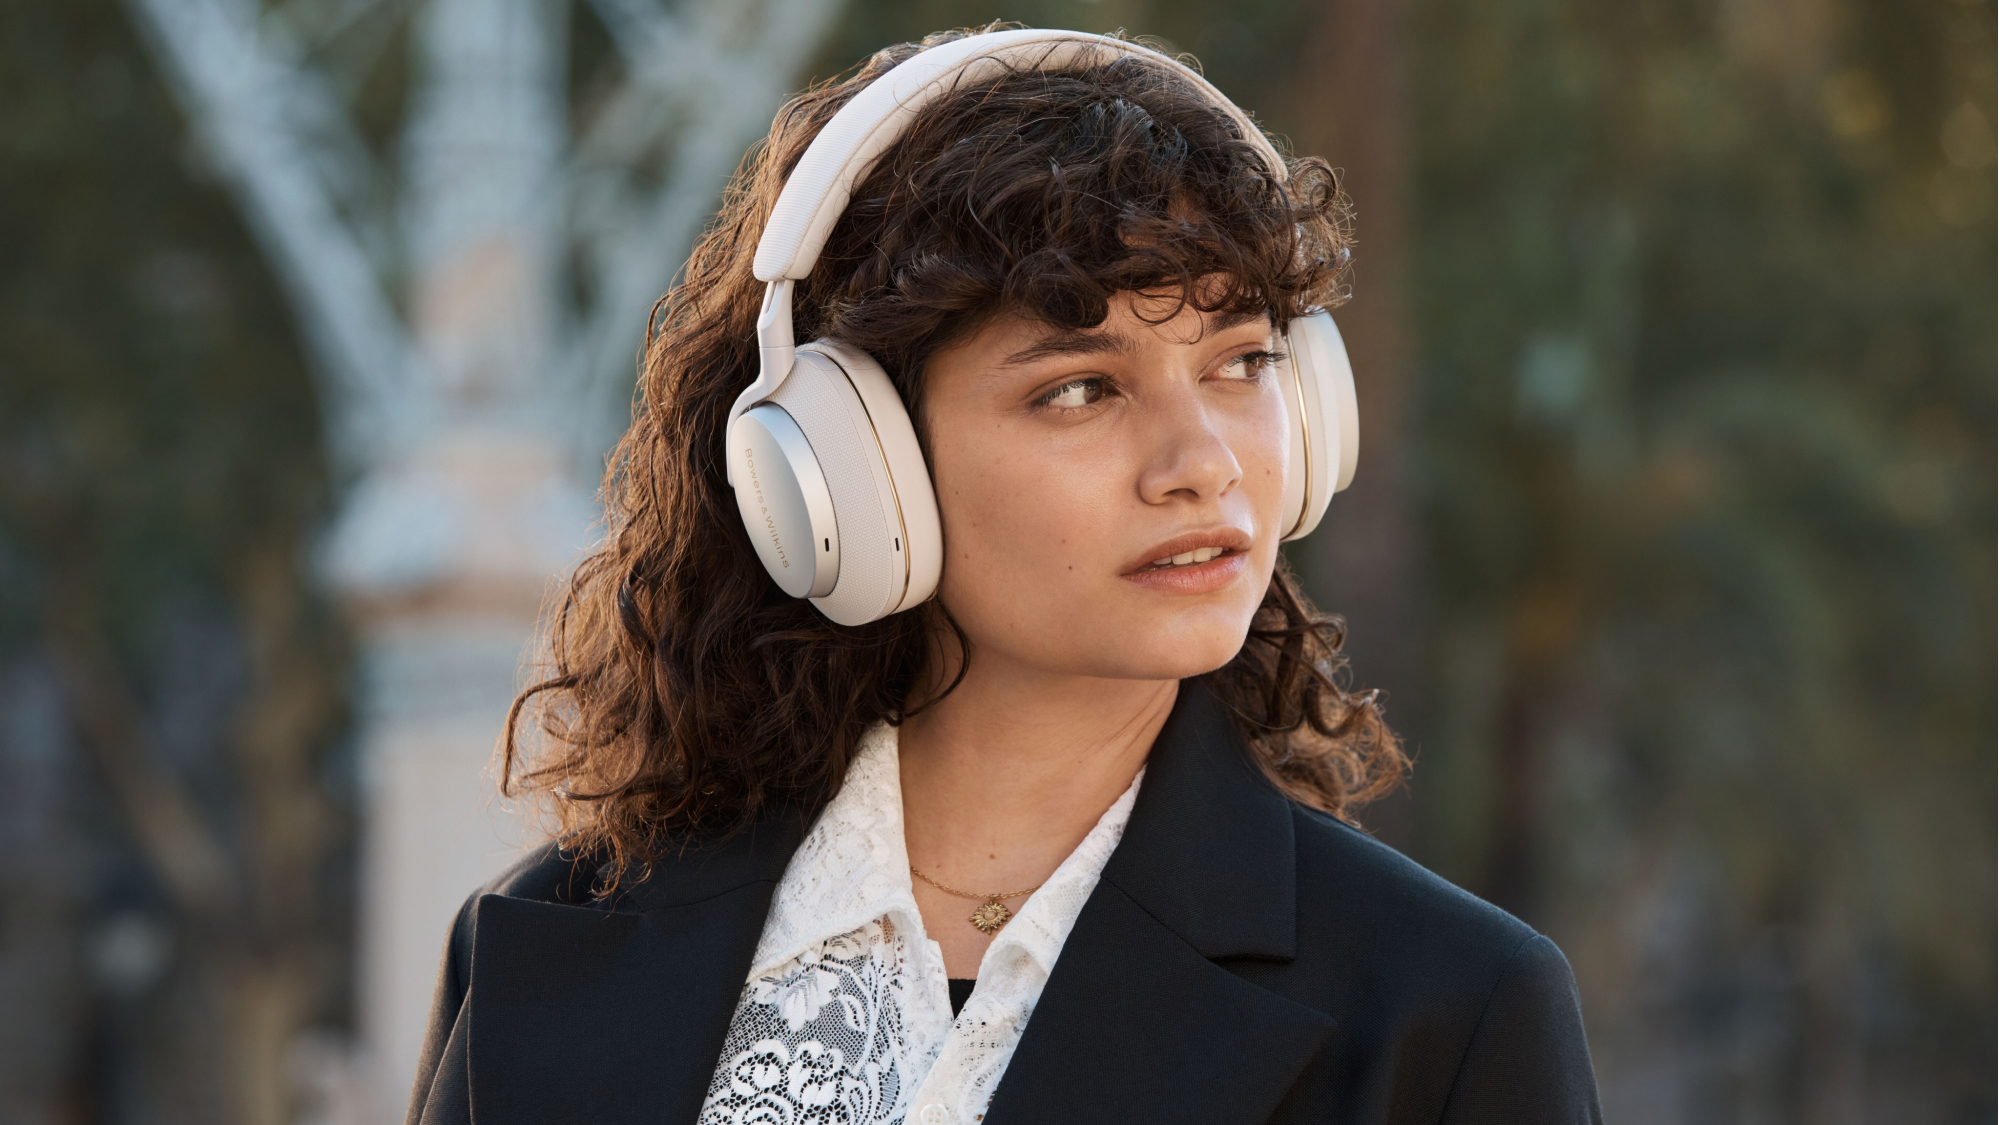 Bandw S Upgraded Noise Cancelling Headphones Are Here To Take On The Sony Wh 1000xm5 Techradar